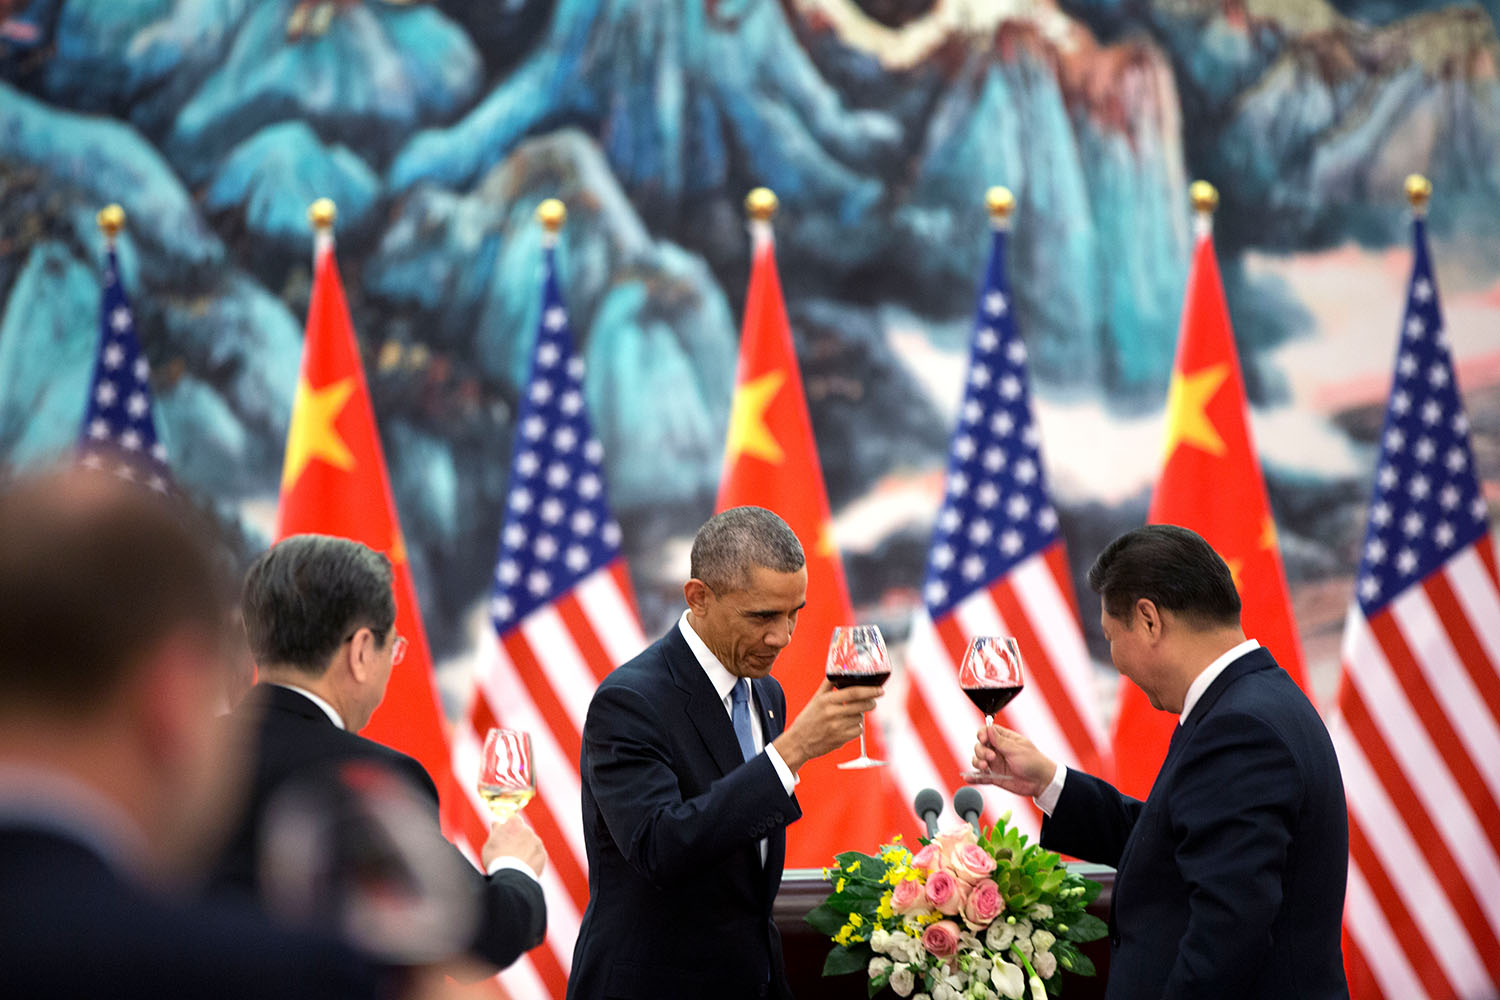 President Barack Obama offers a toast to President Xi Jinping of China during a State Banquet at the Great Hall of People in Beijing, China, Nov. 12, 2014. (Official White House Photo by Pete Souza)